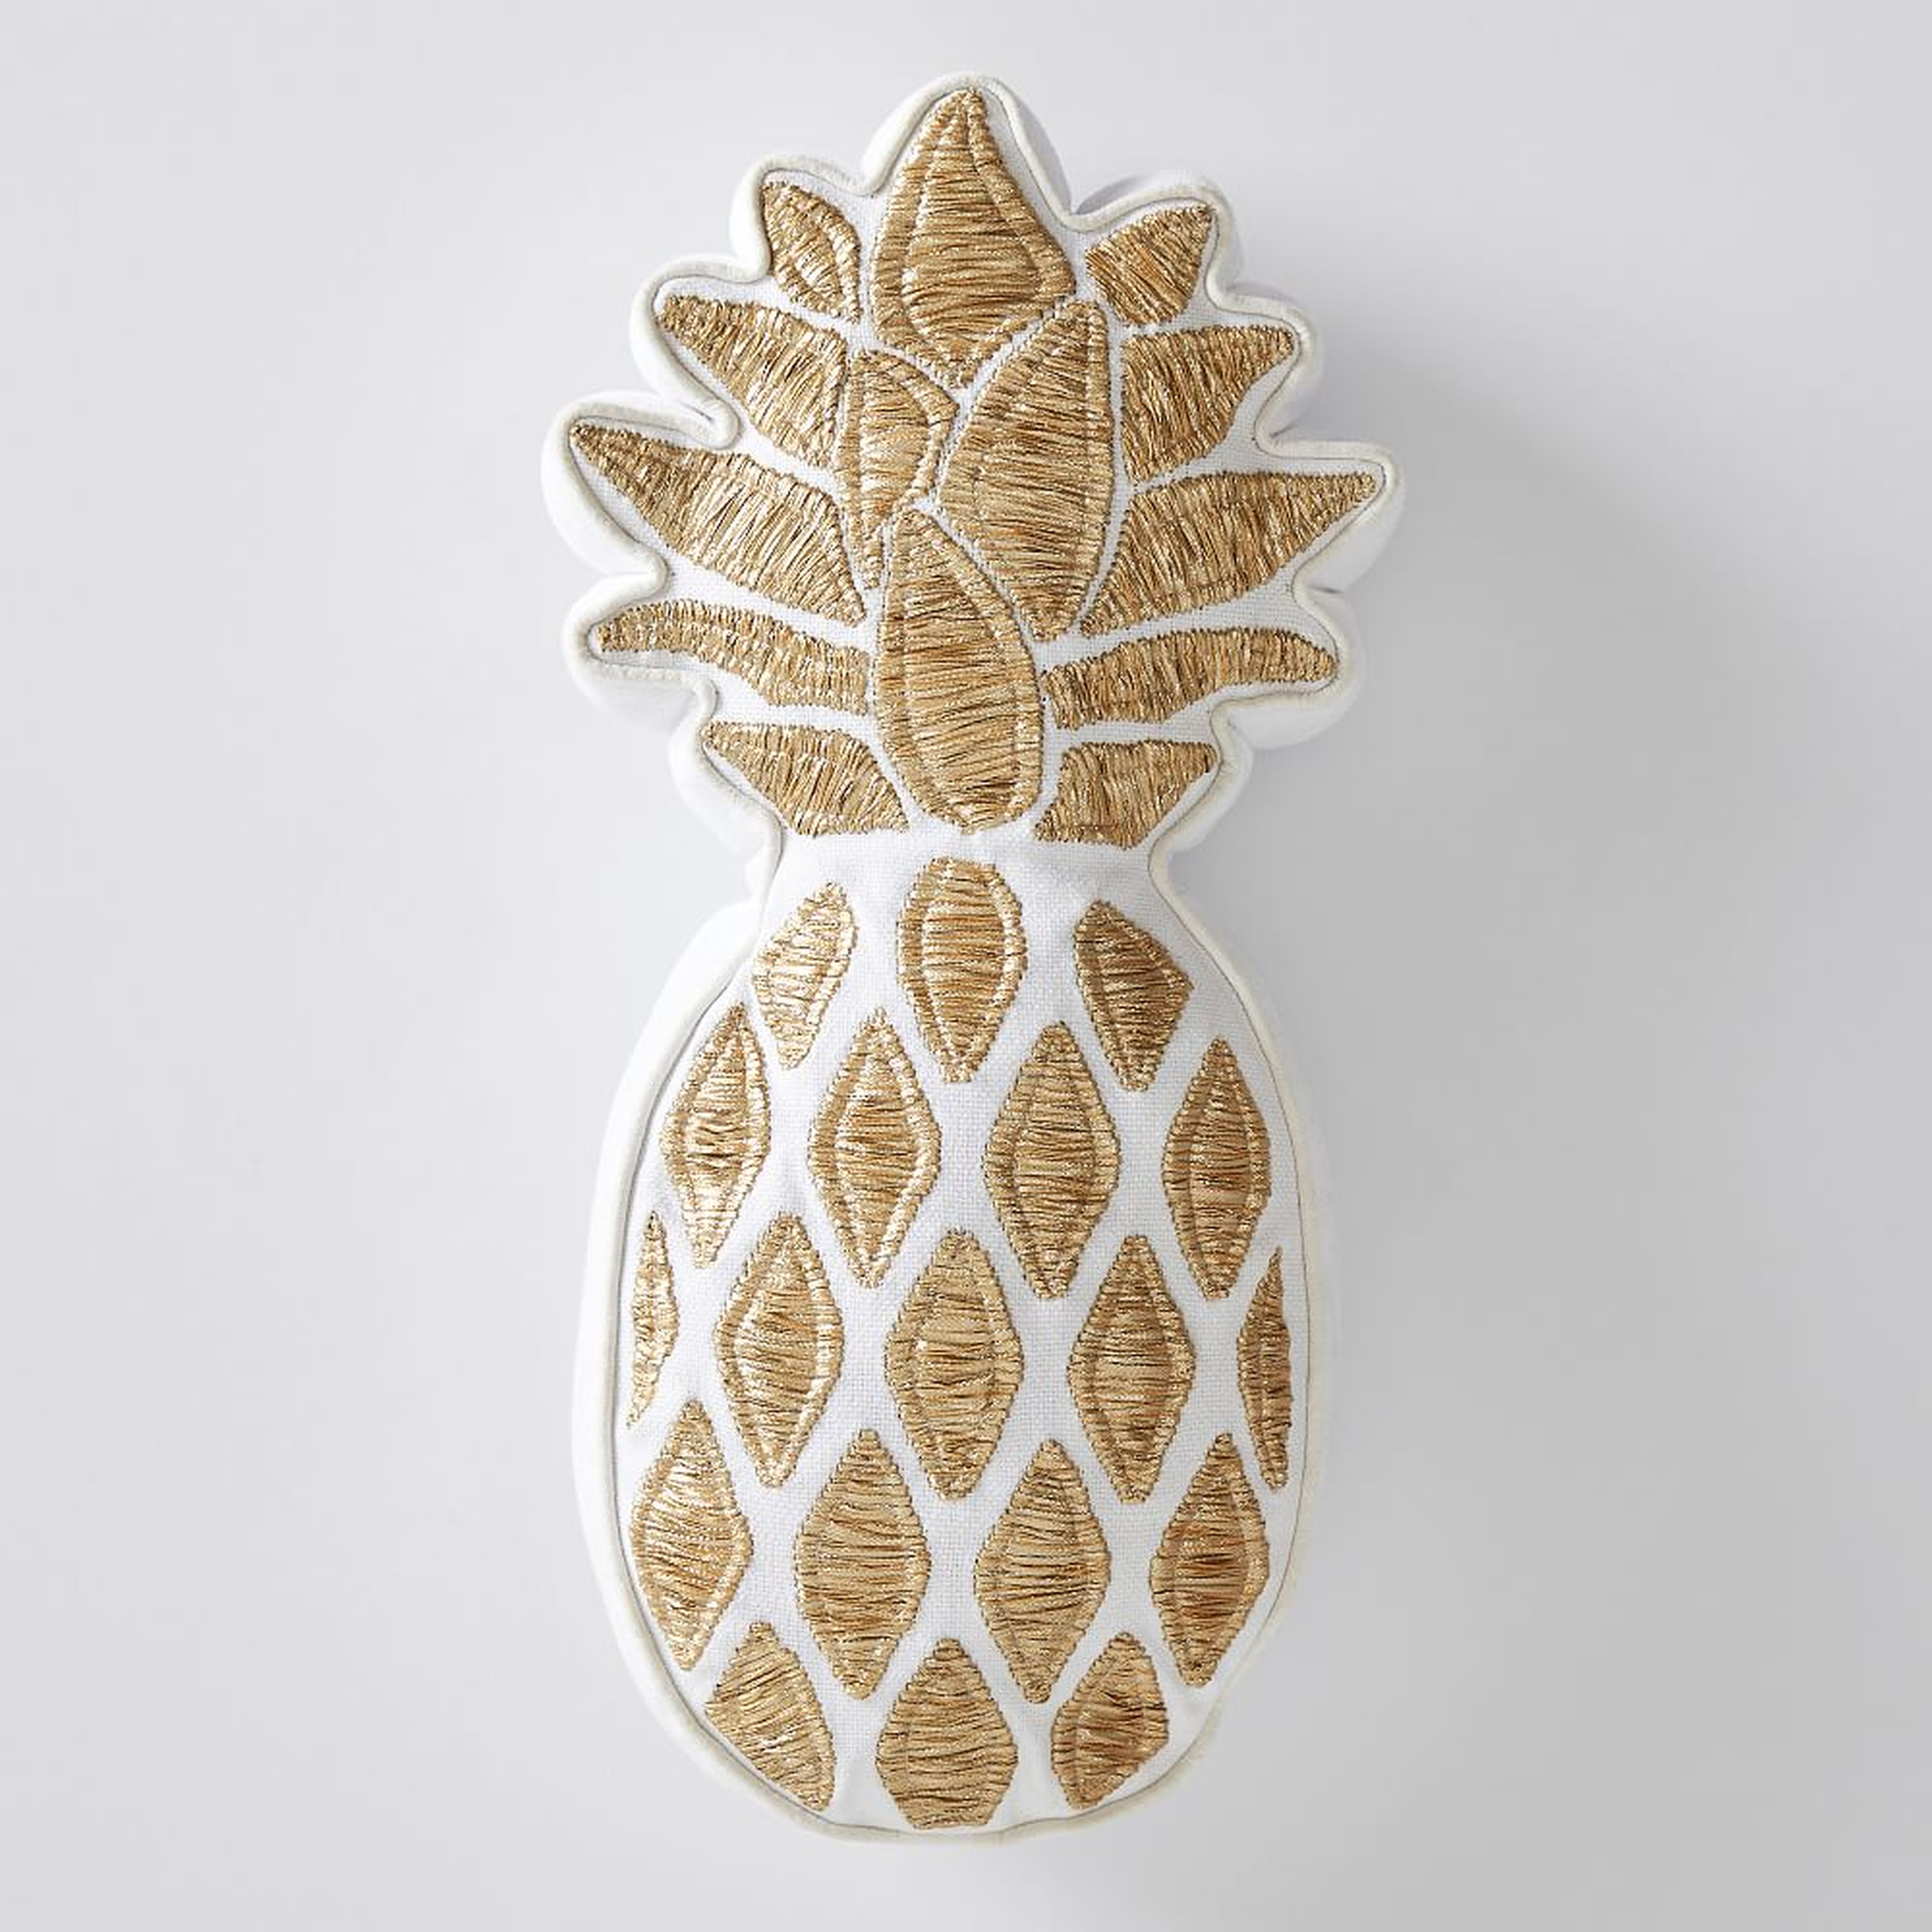 Lilly Pulitzer Pineapple Pillow, Gold - Pottery Barn Teen